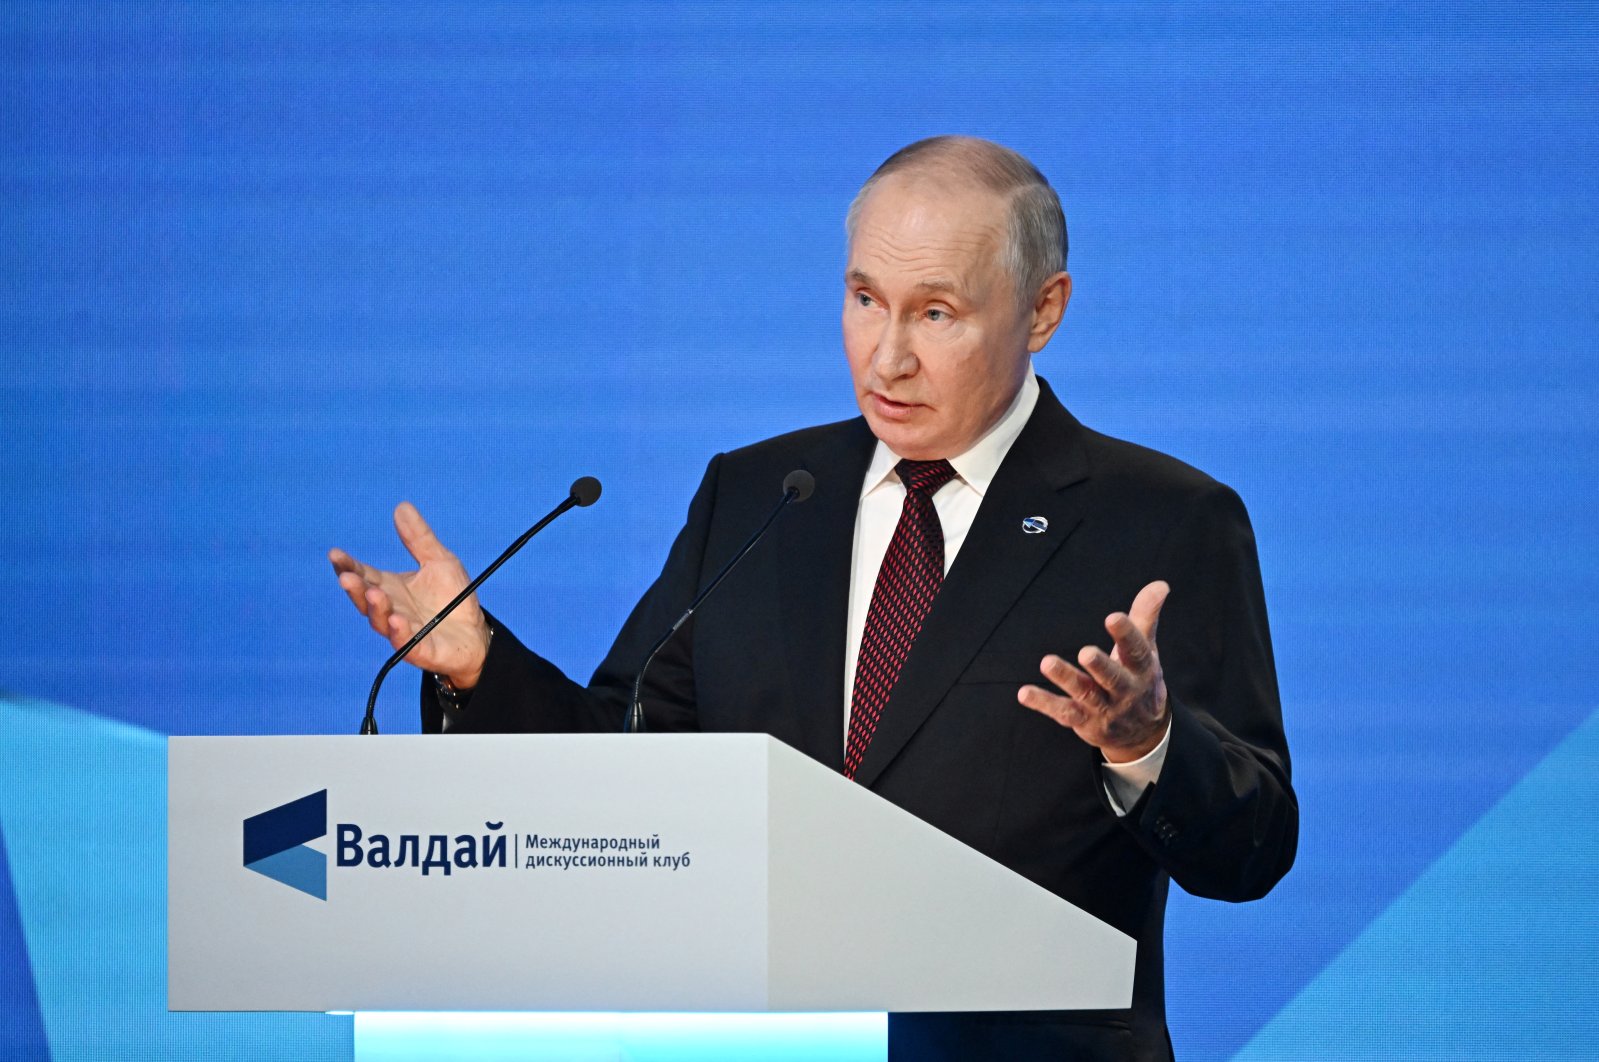 No enemy has chance of survival in case of nuclear strike: Putin